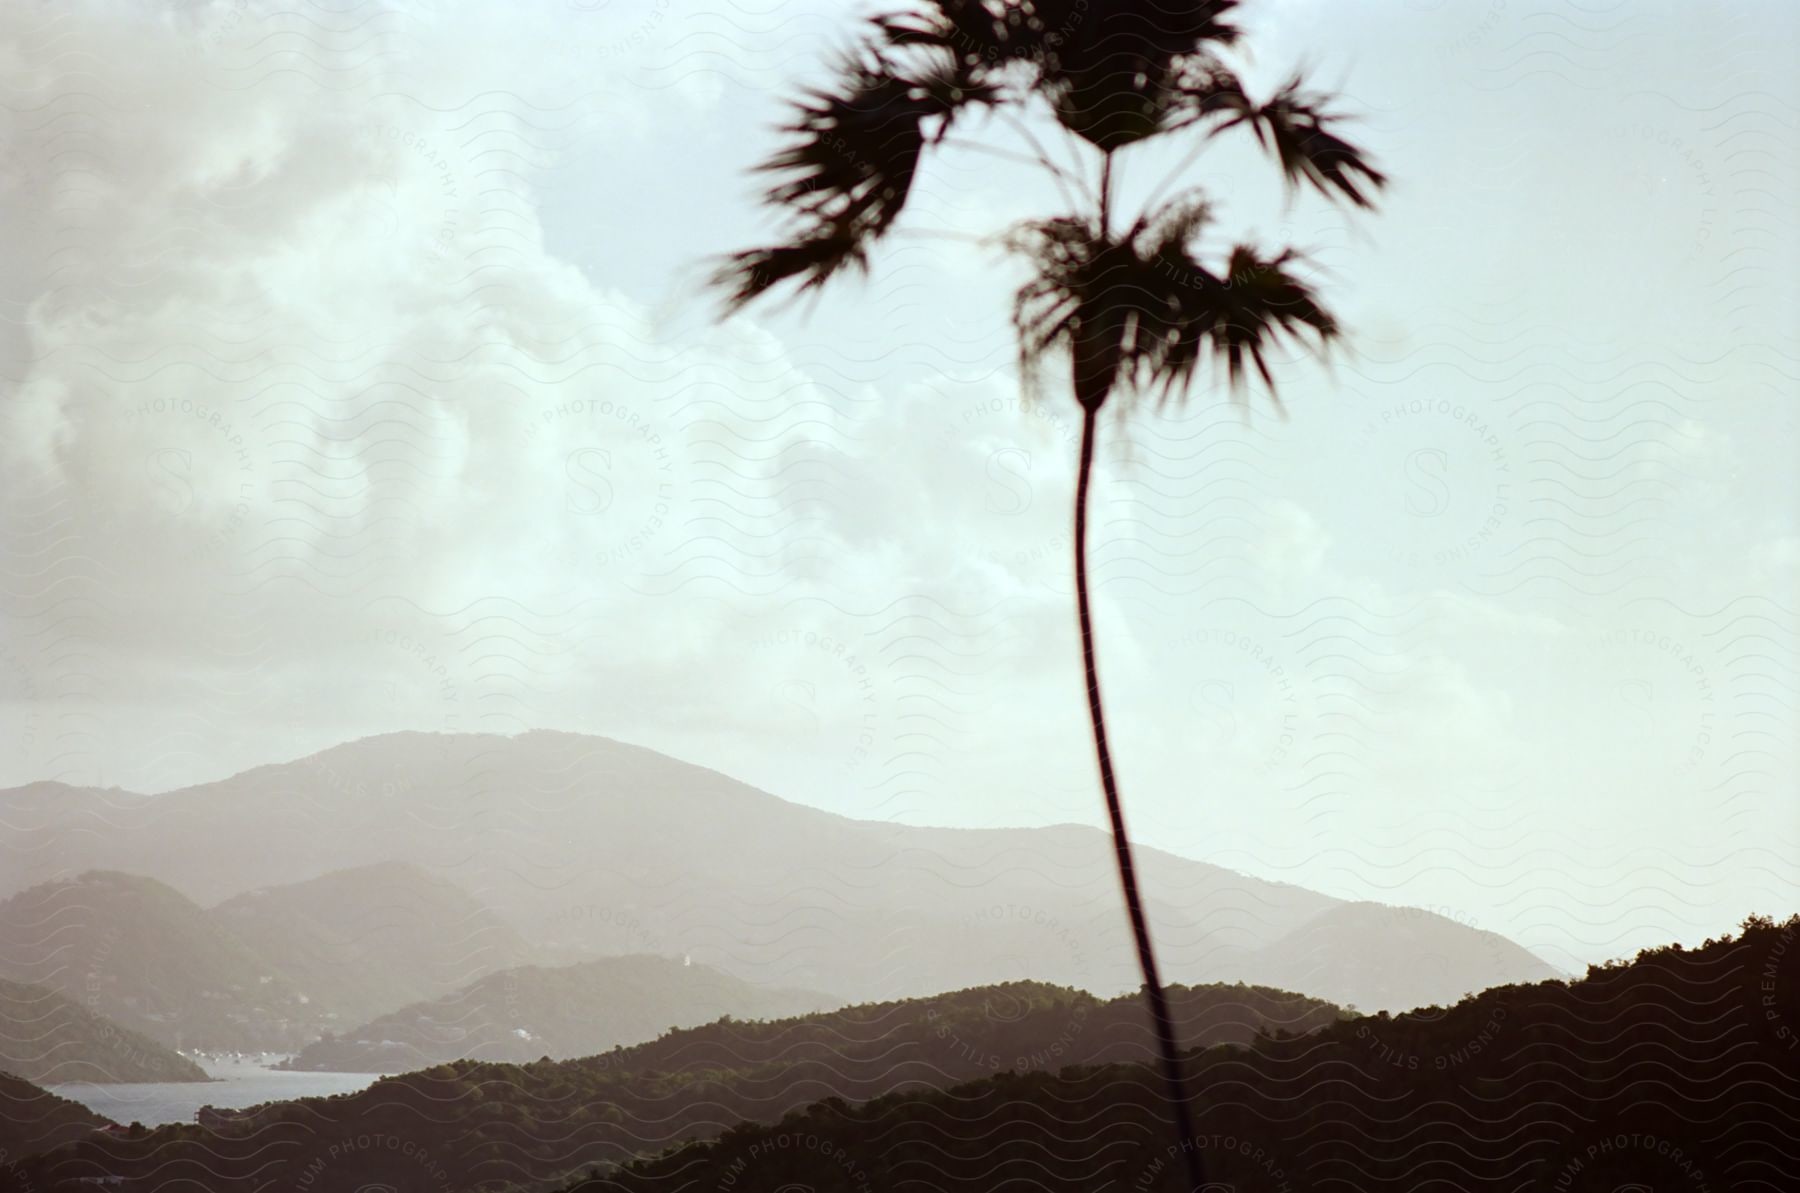 Natural landscape of a palm tree amid mountains with islands on the horizon.